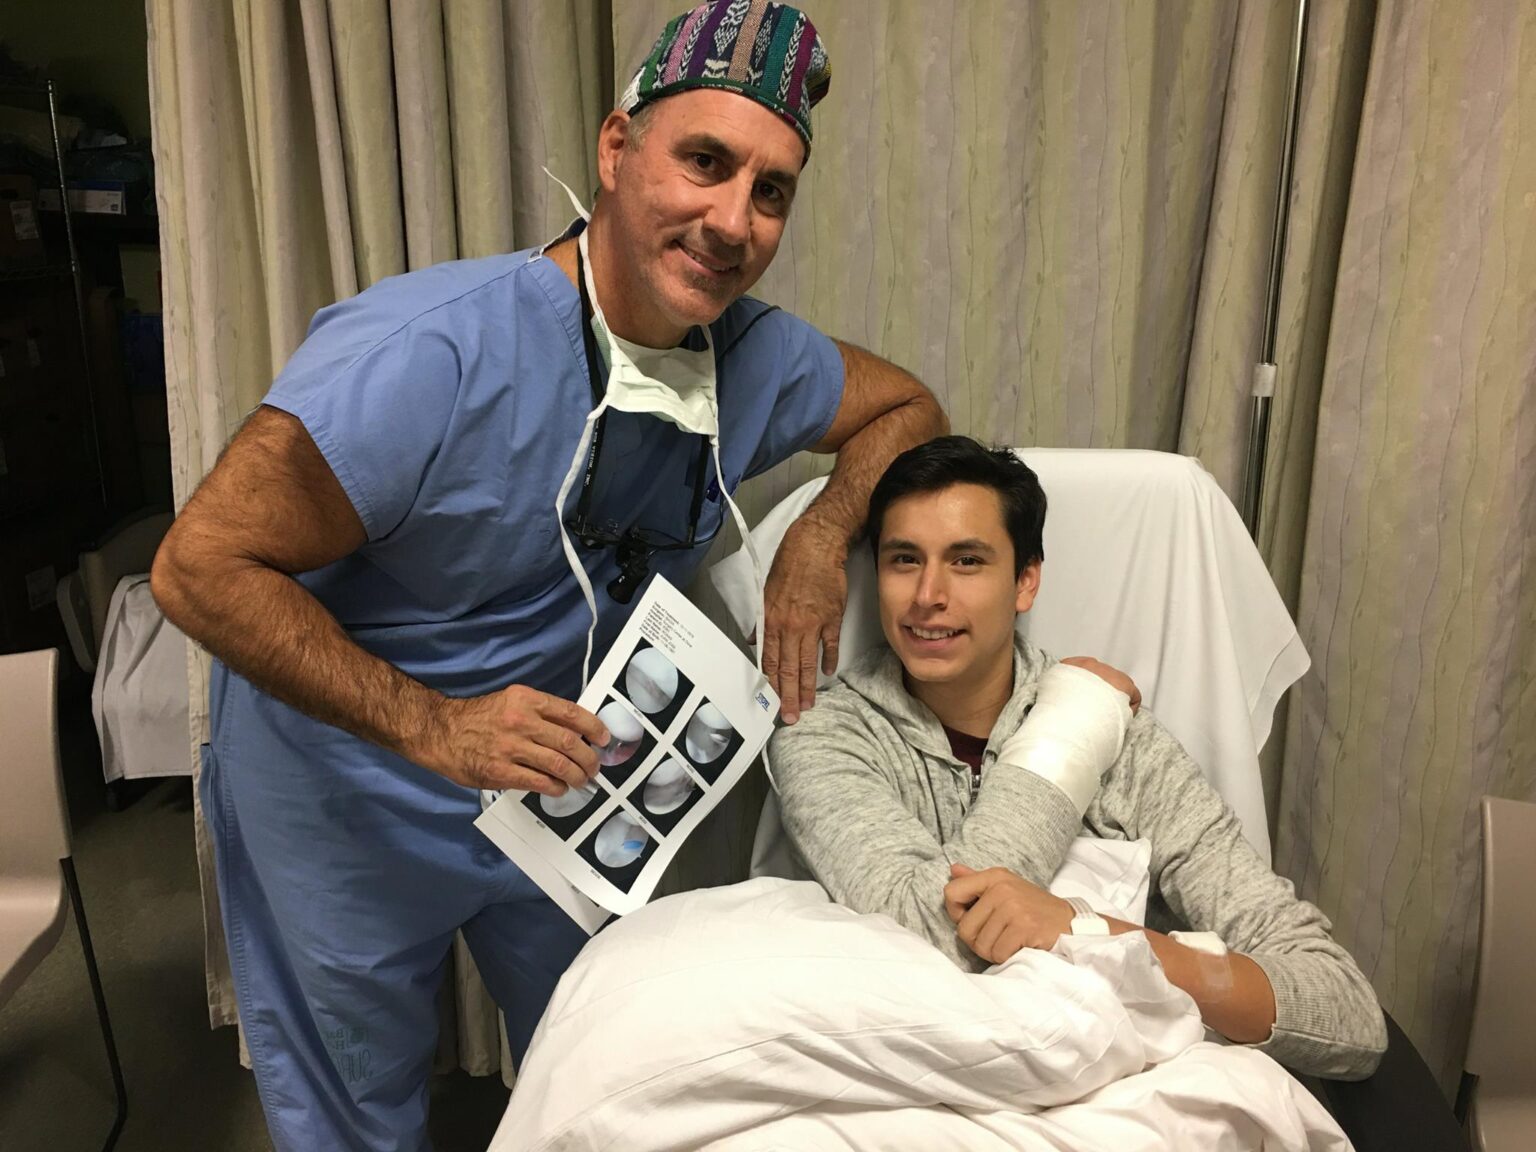 Juan jose rosas in recovery after wrist surgery with Dr. Badia